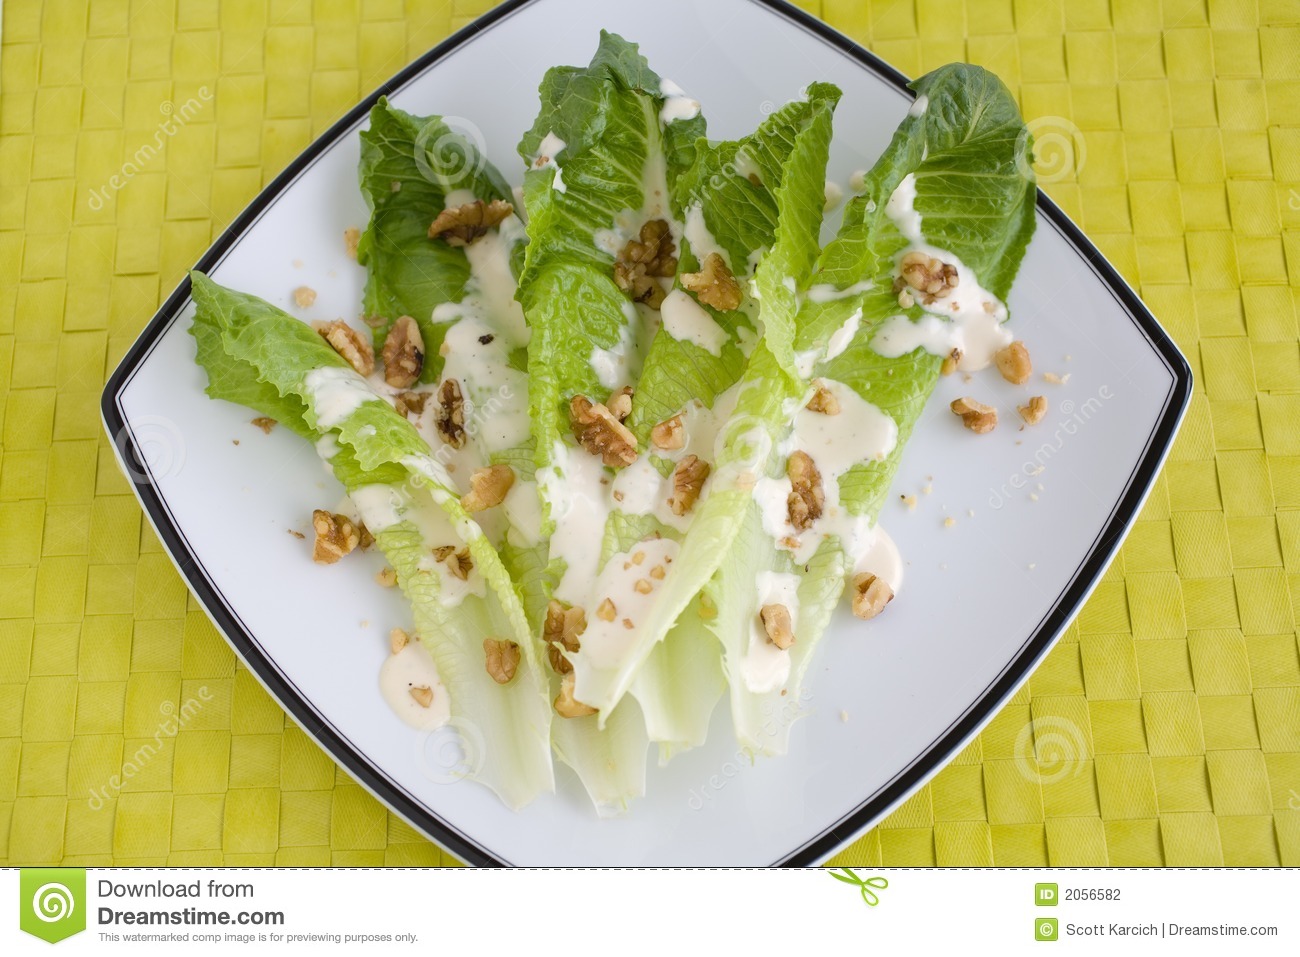 Salad Romaine Lettuce With Ranch Dressing Stock Photography   Image    